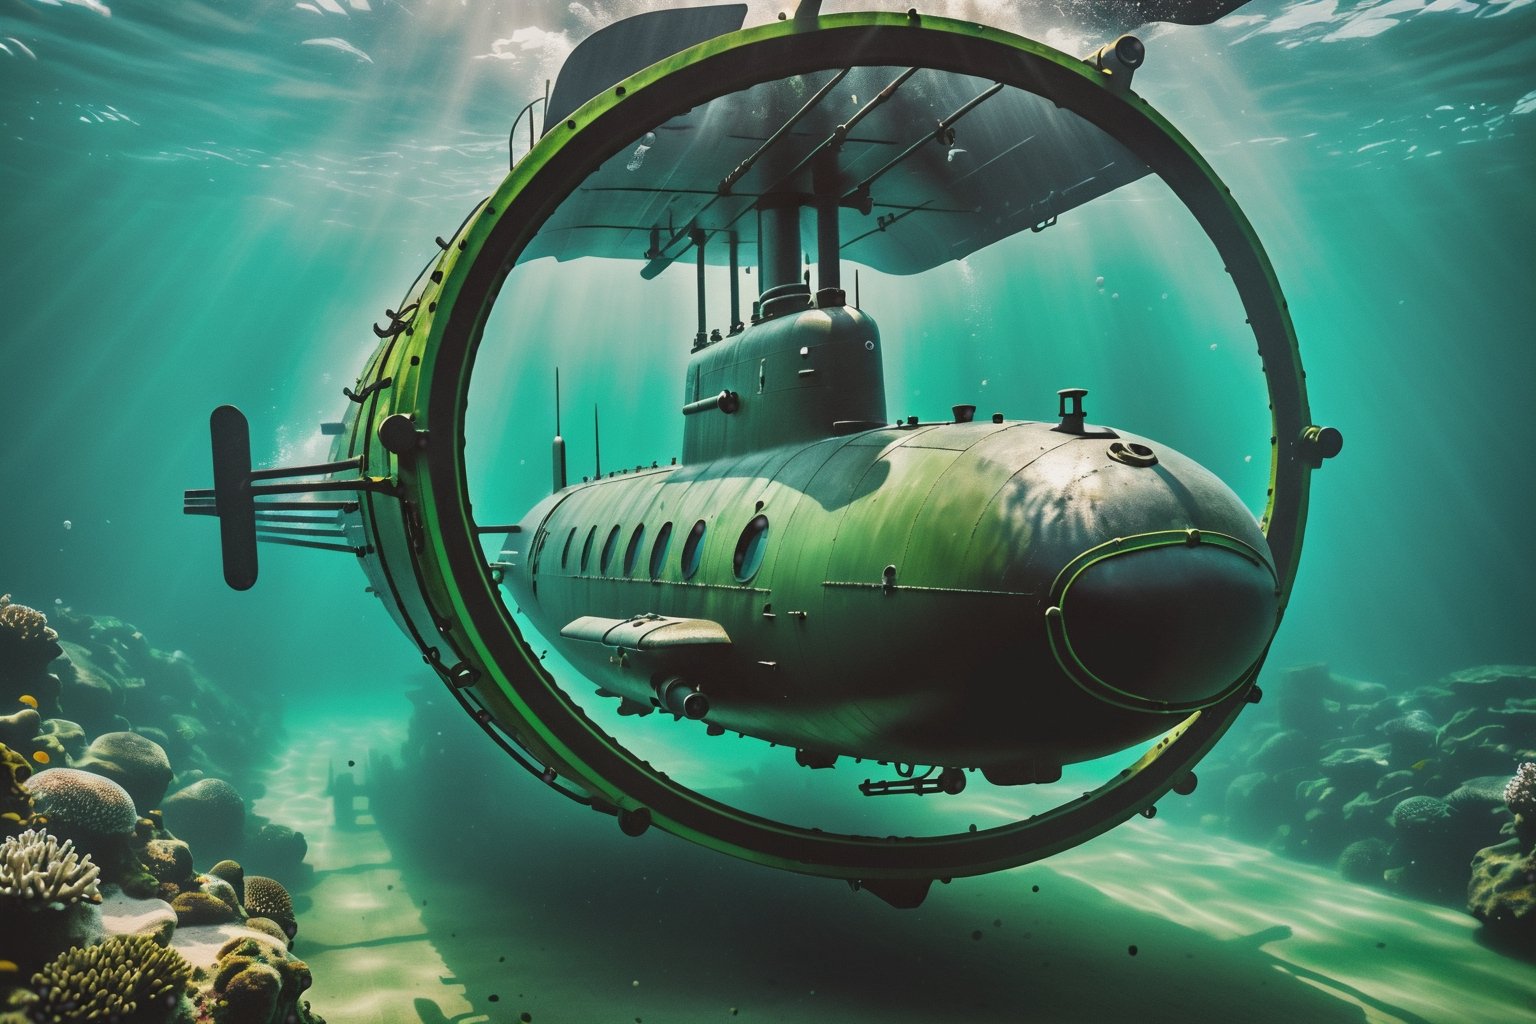 Underwatercore, f/2 camera aperture, photorealistic, cinematic shot on Sony A1, ultra detailed attack submarine, green color, going full speed near sea bottom, water effects, water texture, war vessel shadow, Dynamic motion blur, Blurred Motion, floating particles, Intricate underwater world. 